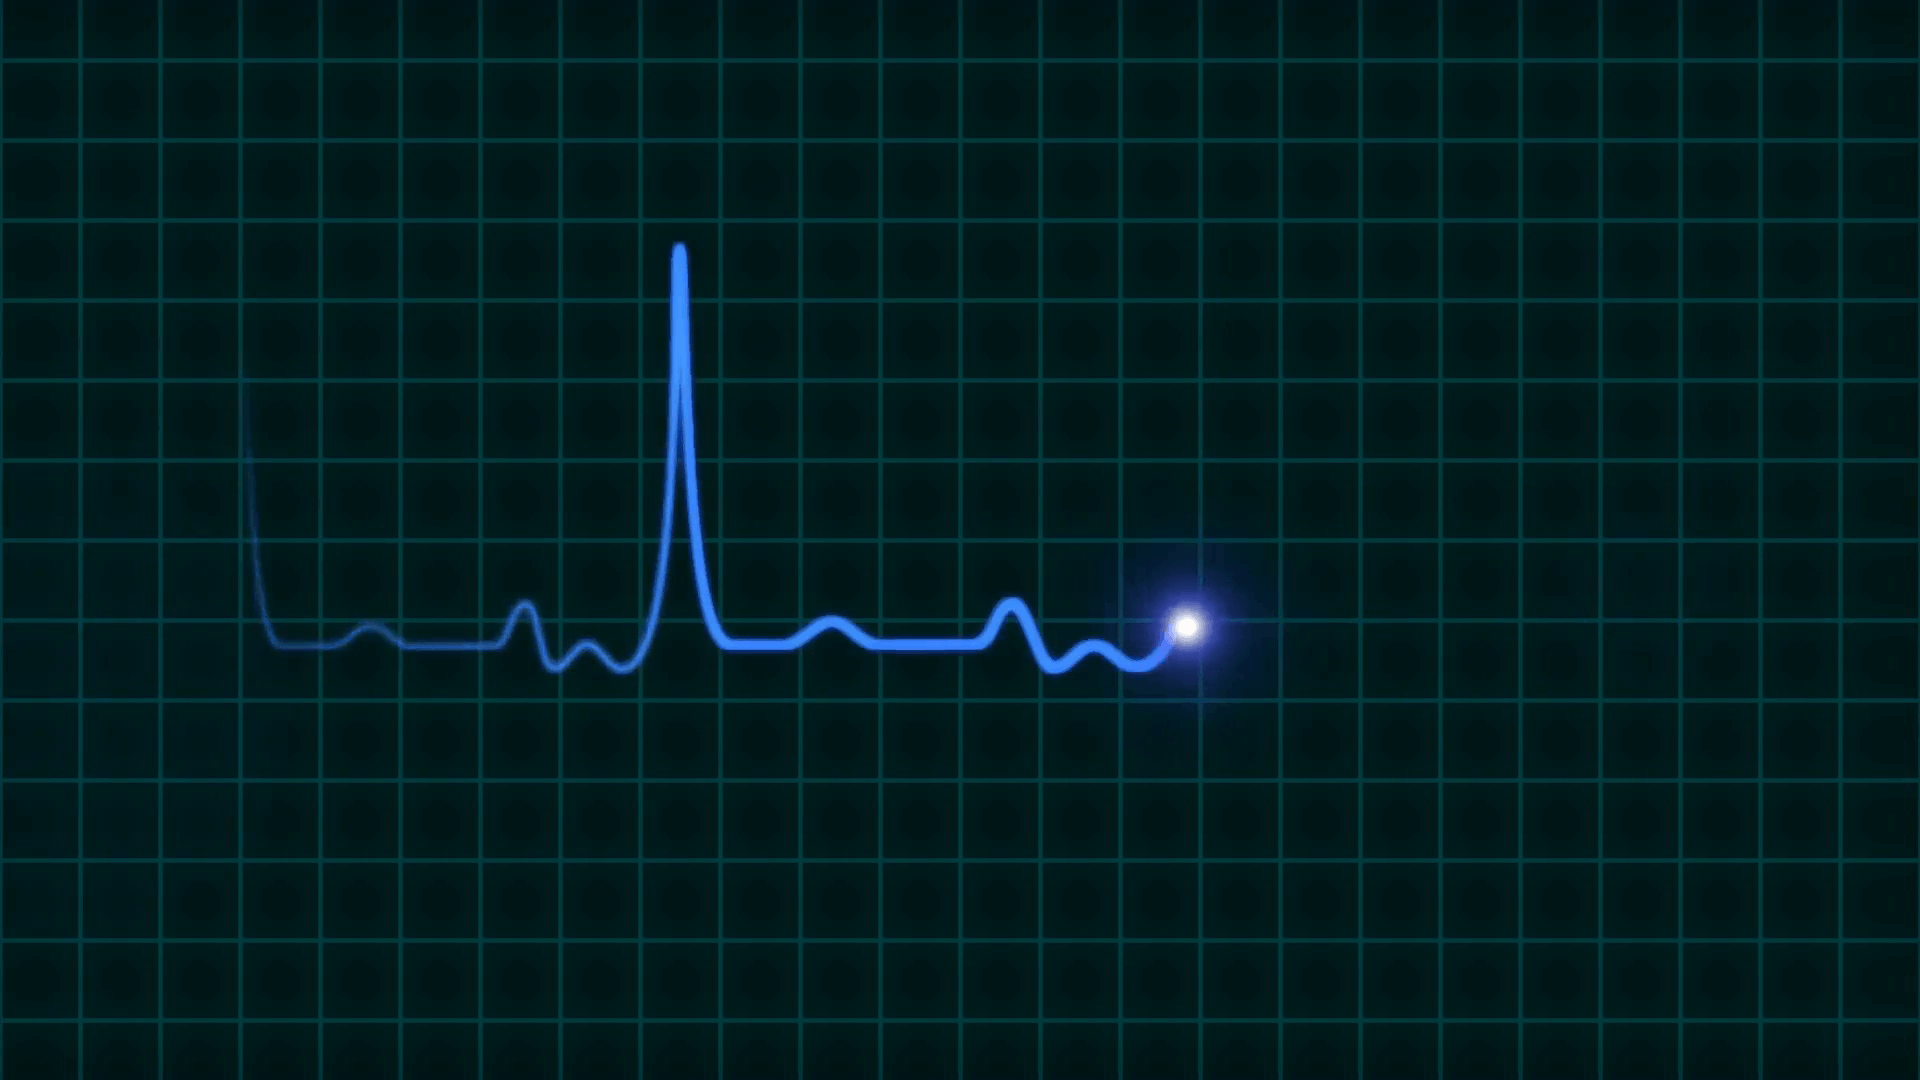 An animated EKG heartbeat monitor in blue wave line one beat